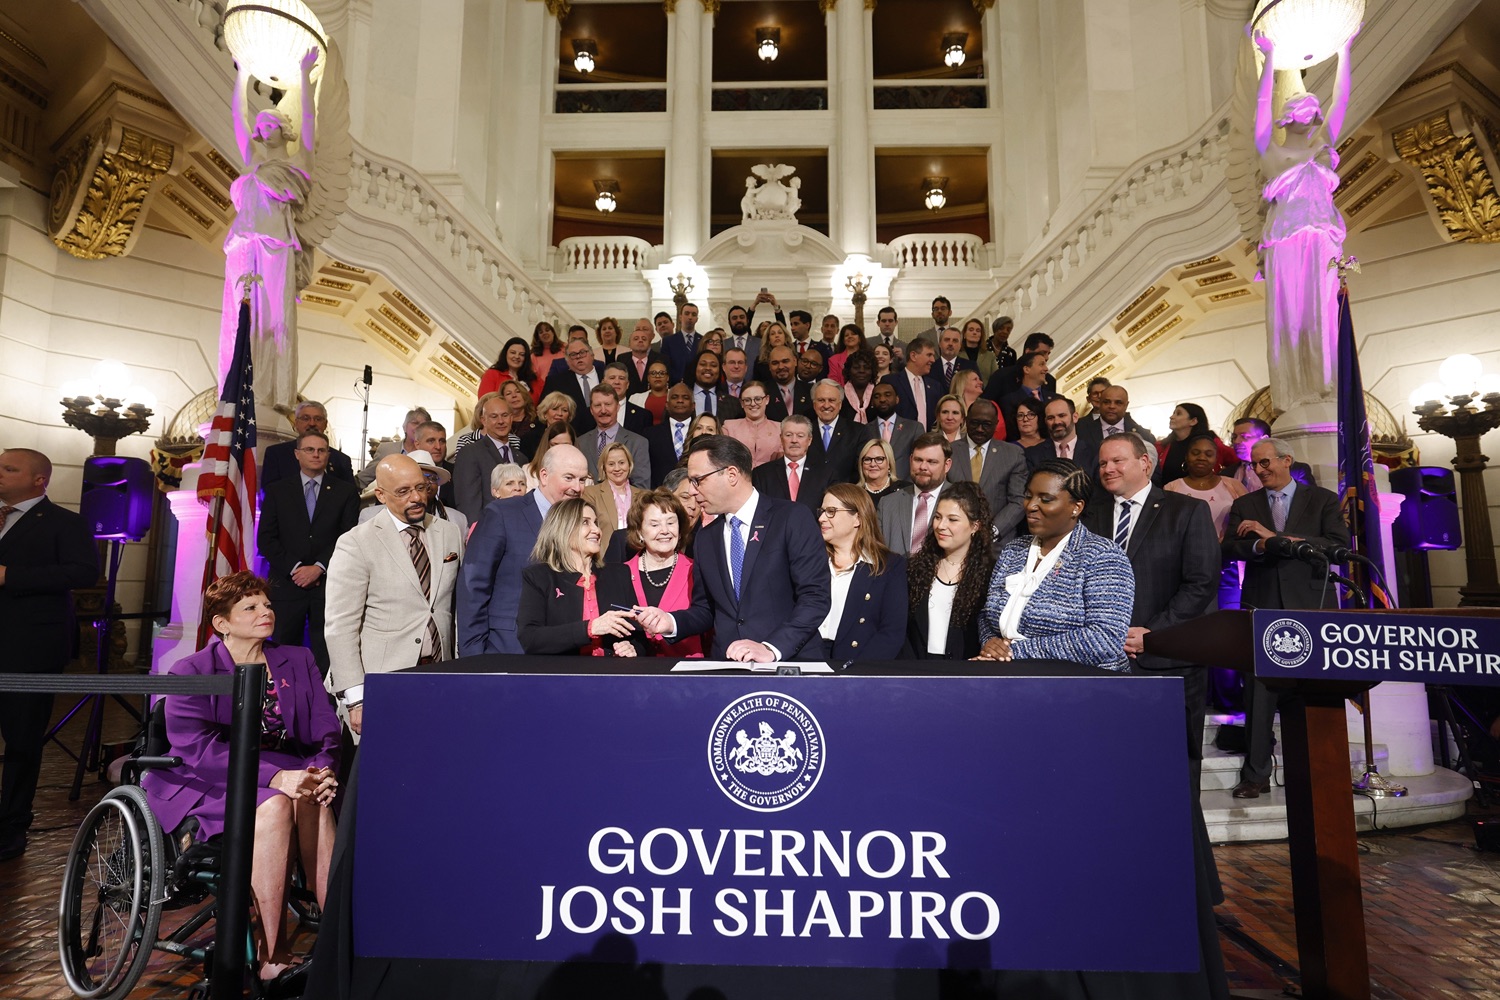 Governor Josh Shapiro signed the first bill of his Administration - Act 1 of 2023, a first-of-its-kind law in the nation that will require insurers to cover preventive breast and ovarian cancer screenings for high-risk women at no cost. MAY 01, 2023 - HARRISBURG, PA<br><a href="https://filesource.amperwave.net/commonwealthofpa/photo/23041_gov_sb8_dz_011.JPG" target="_blank">⇣ Download Photo</a>